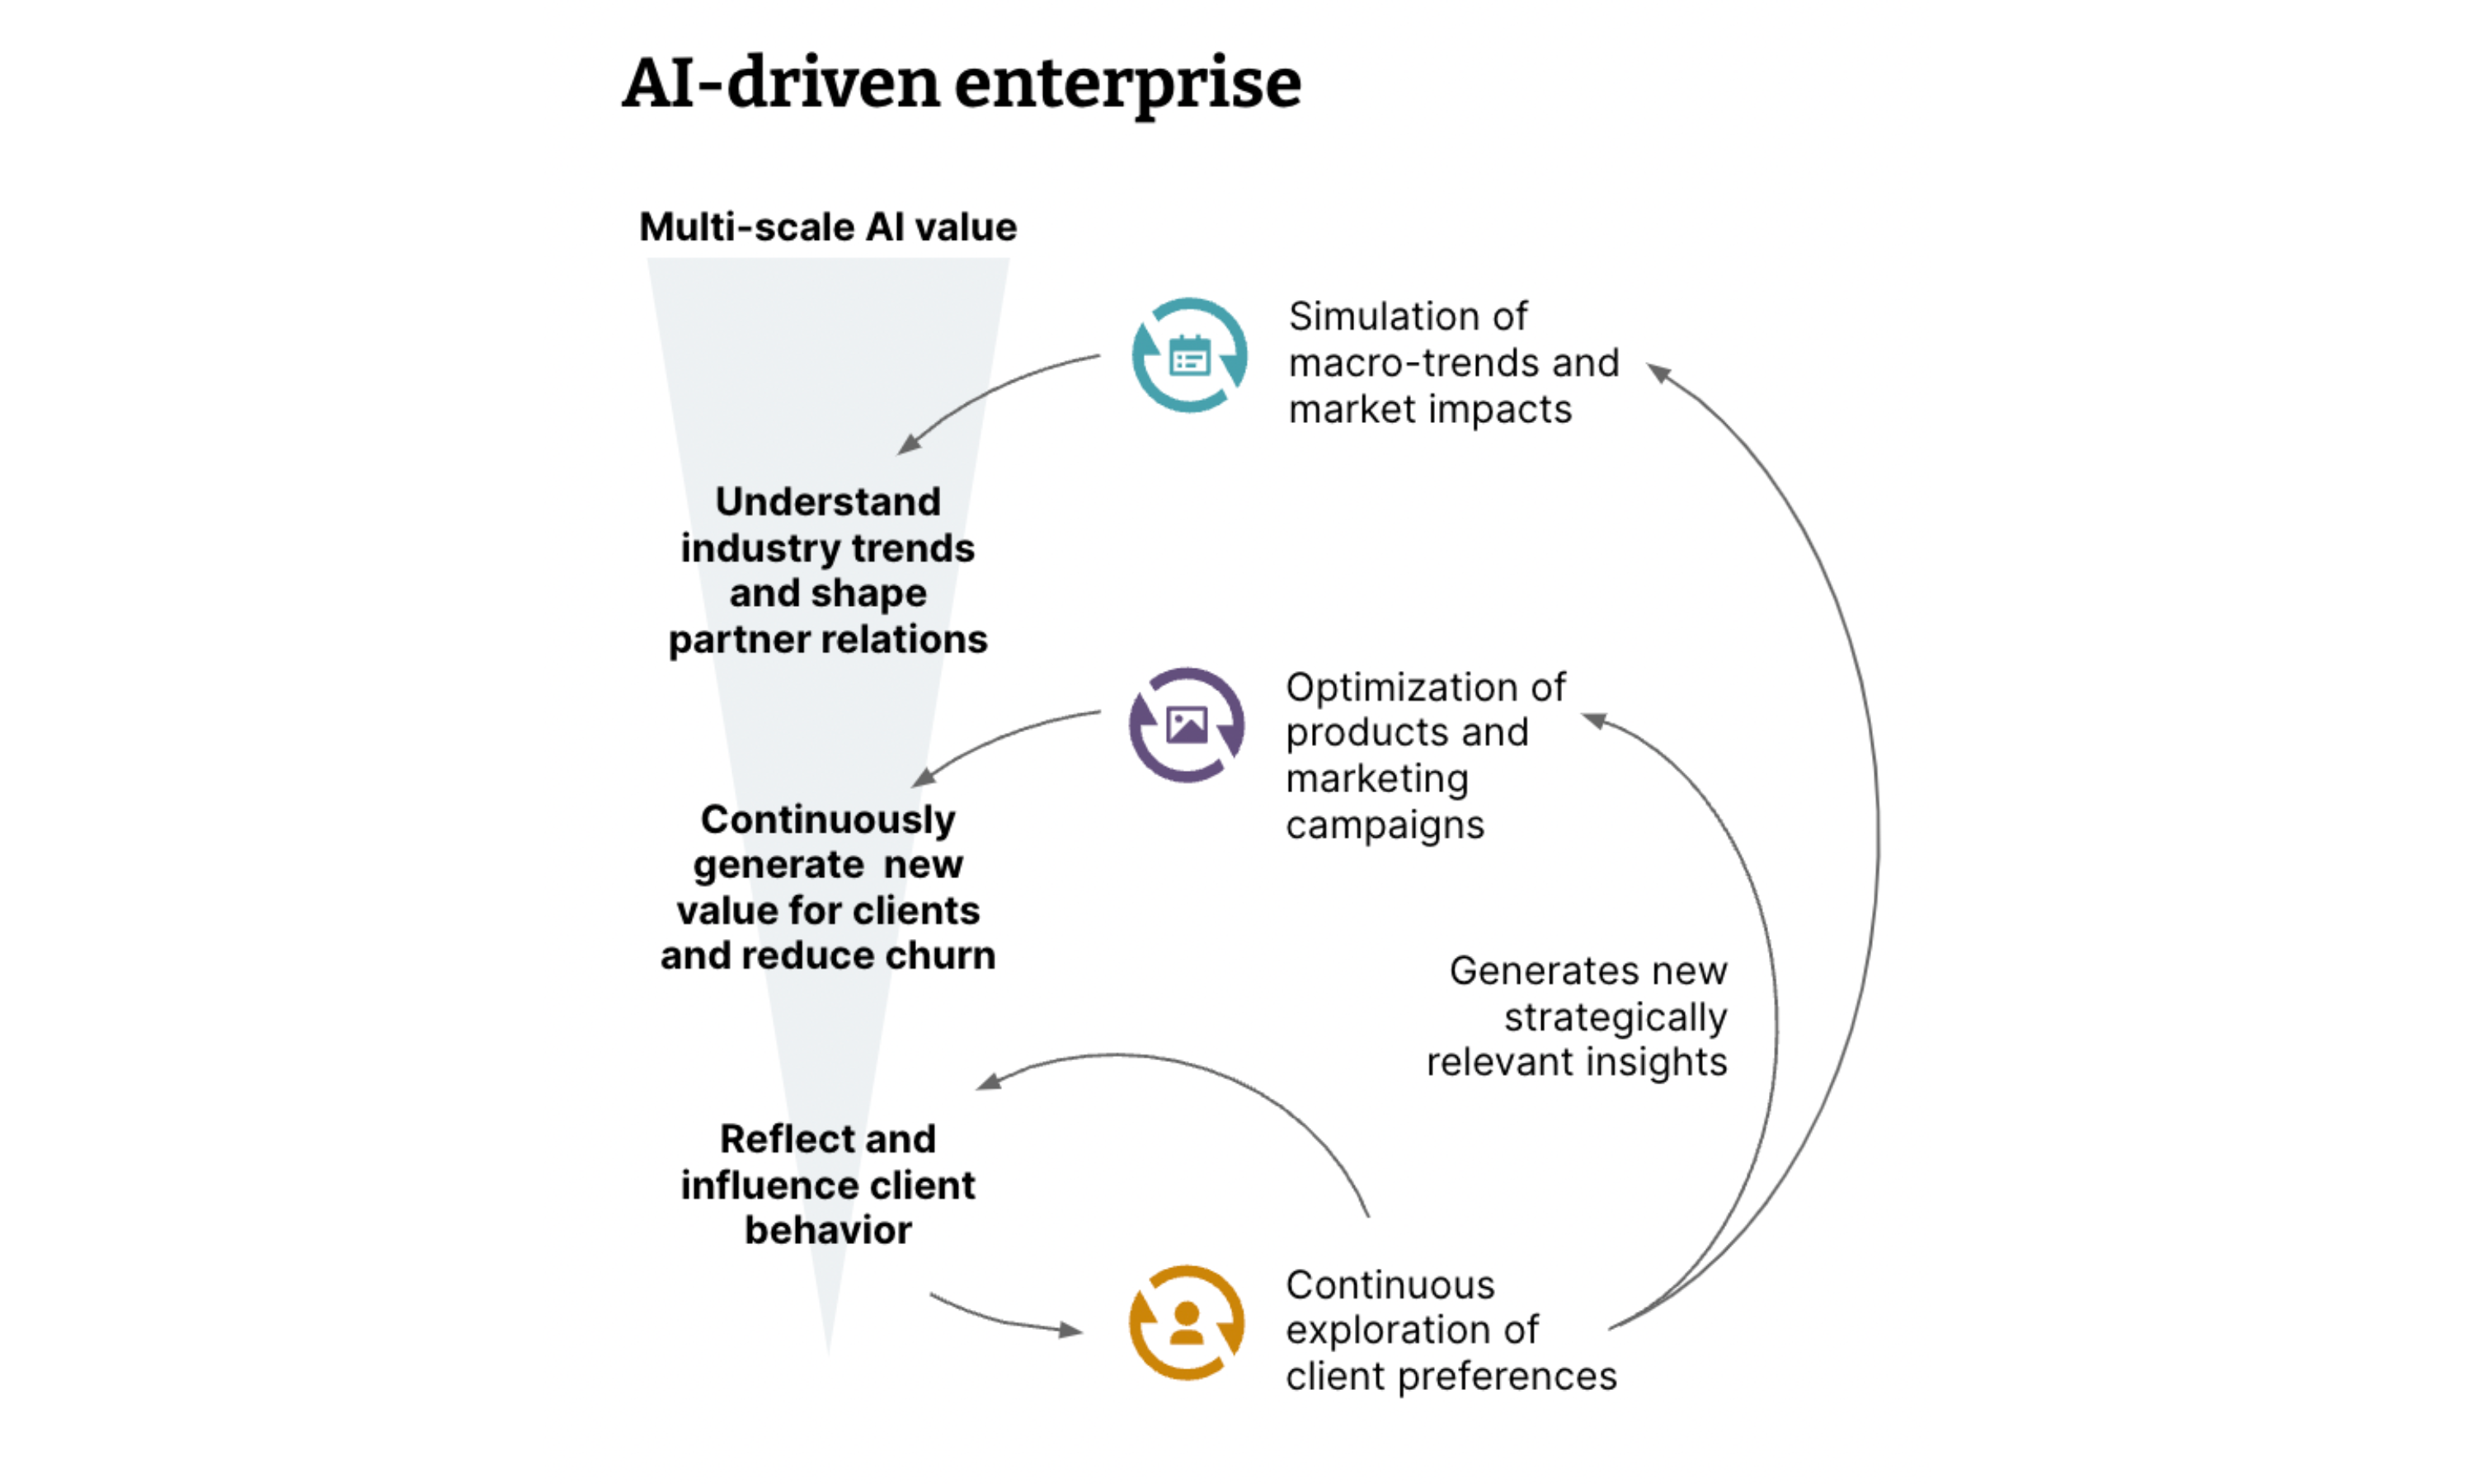 Diagram showing how in an AI-driven enterprise, multi-scale AI value is generated as operational insights are used to drive strategic decision making